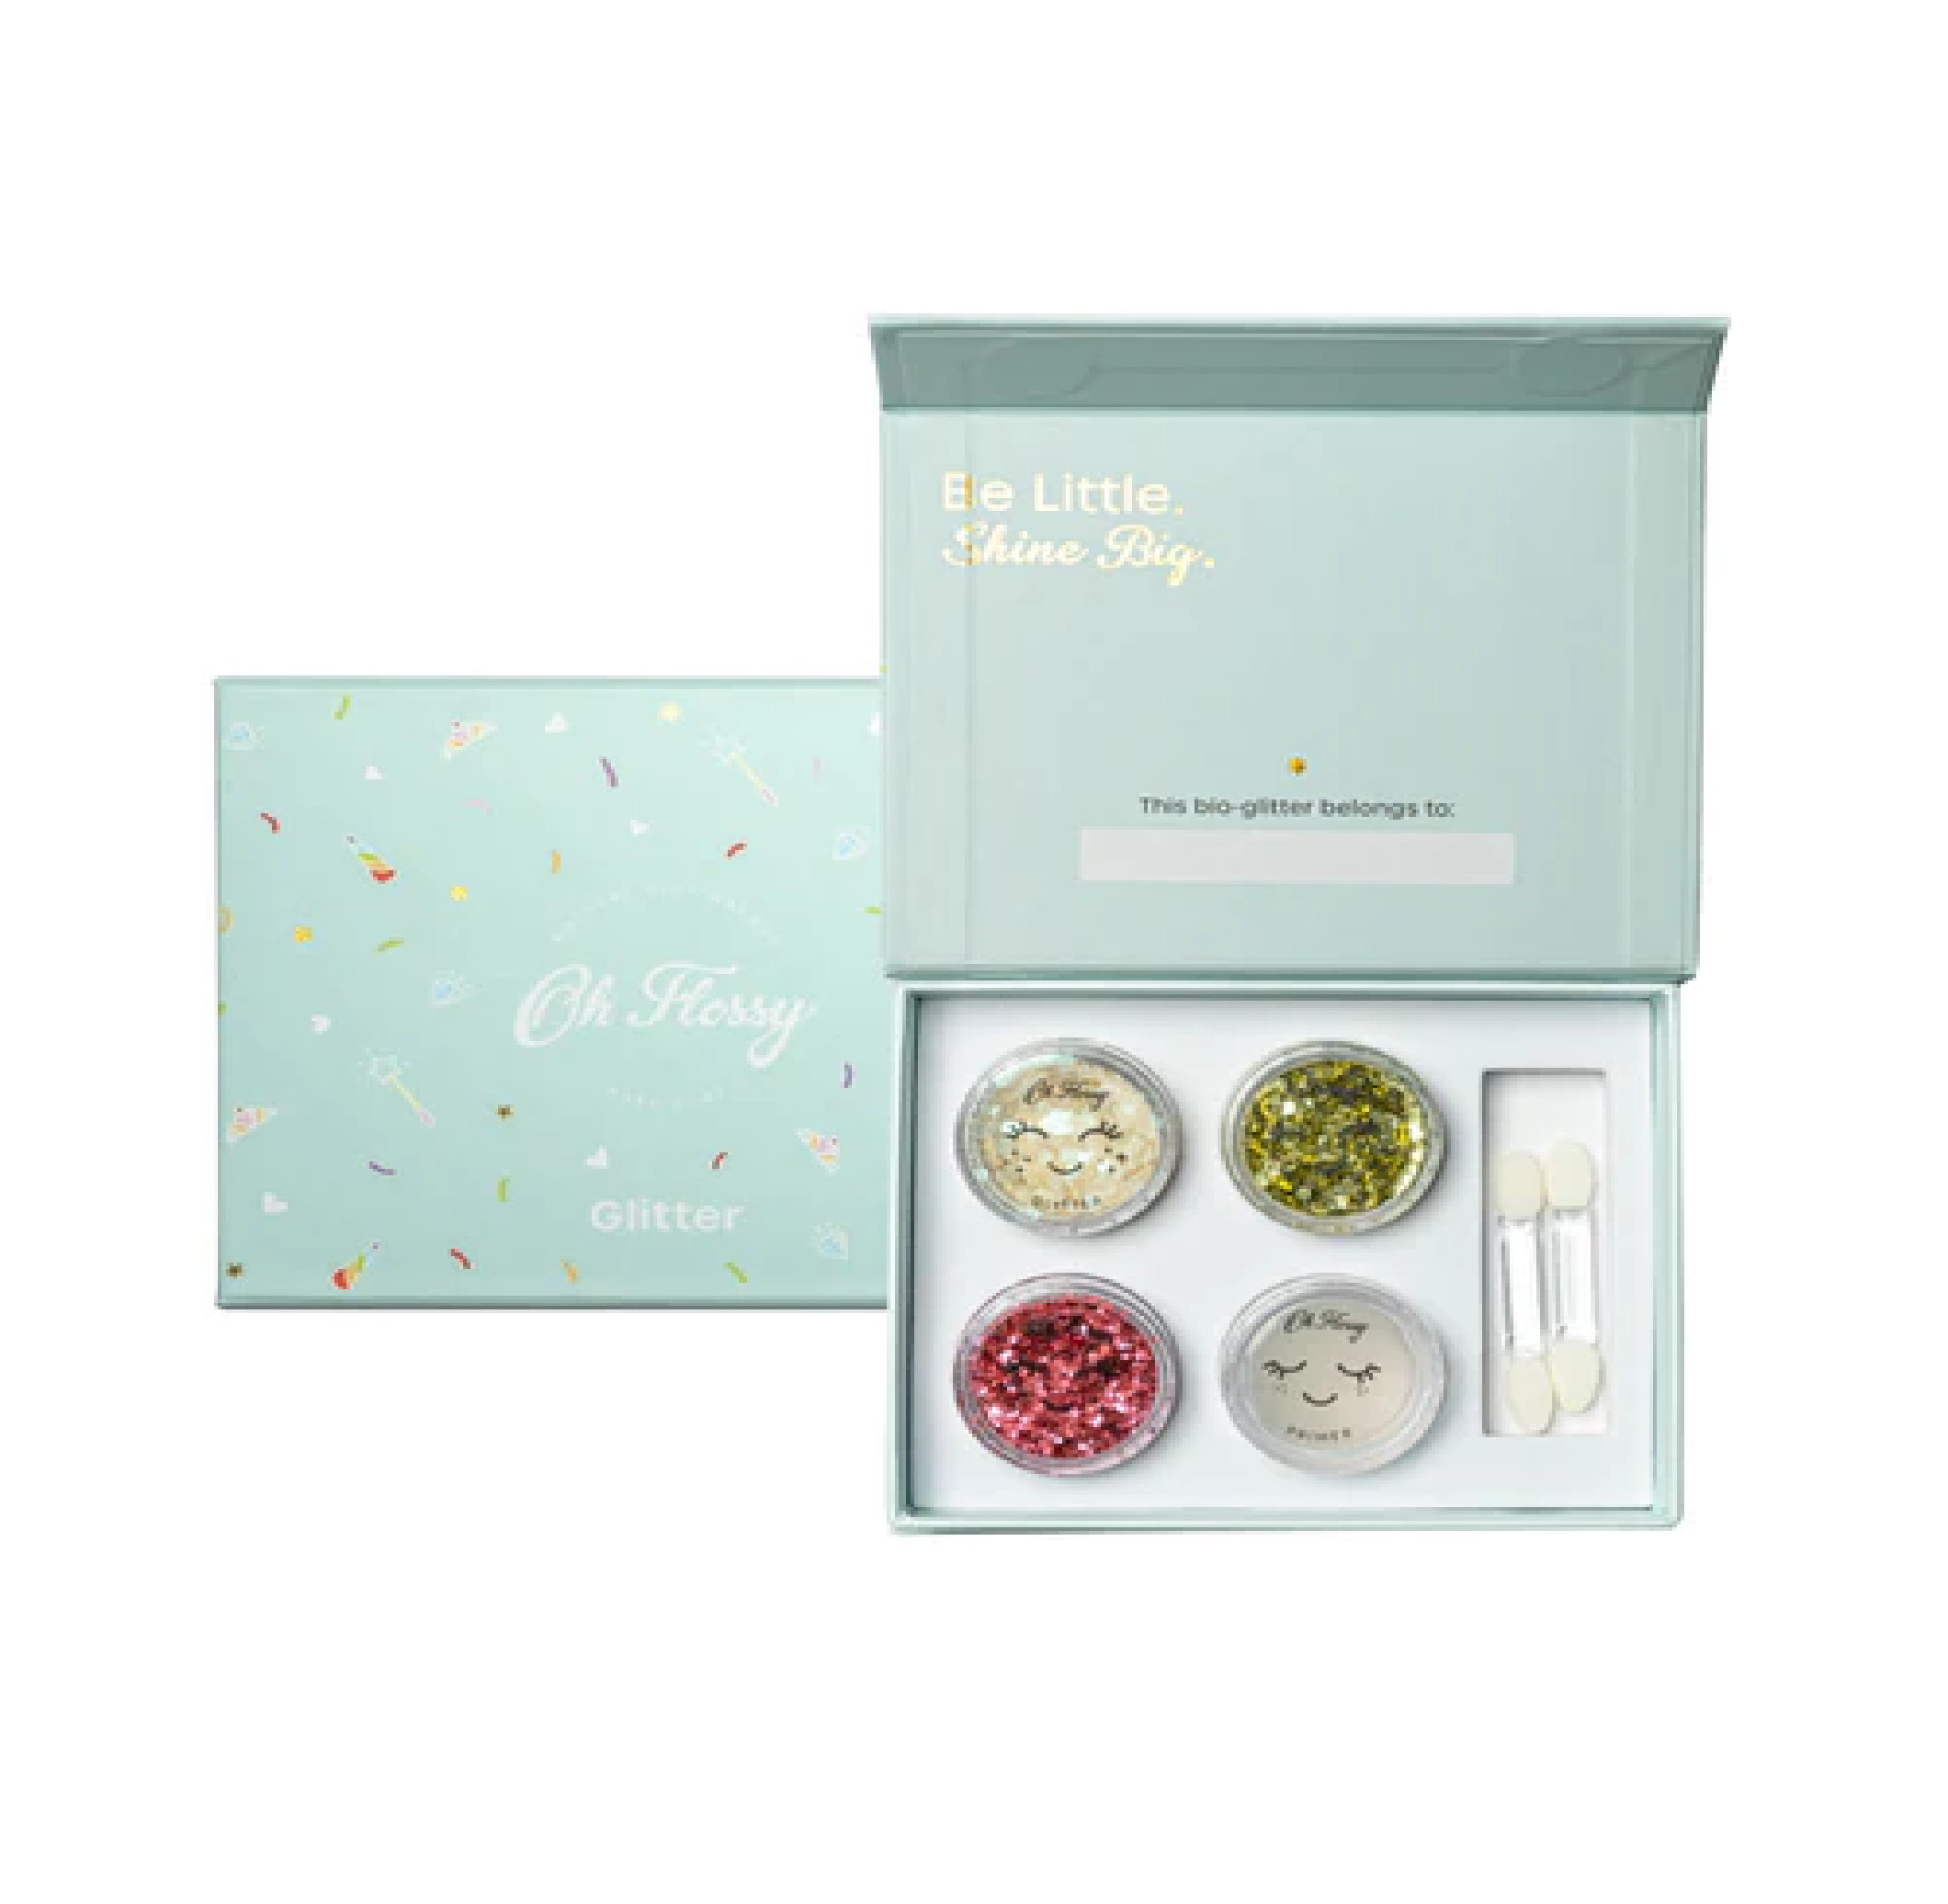 Oh Flossy -  Sparkly Glitter Set